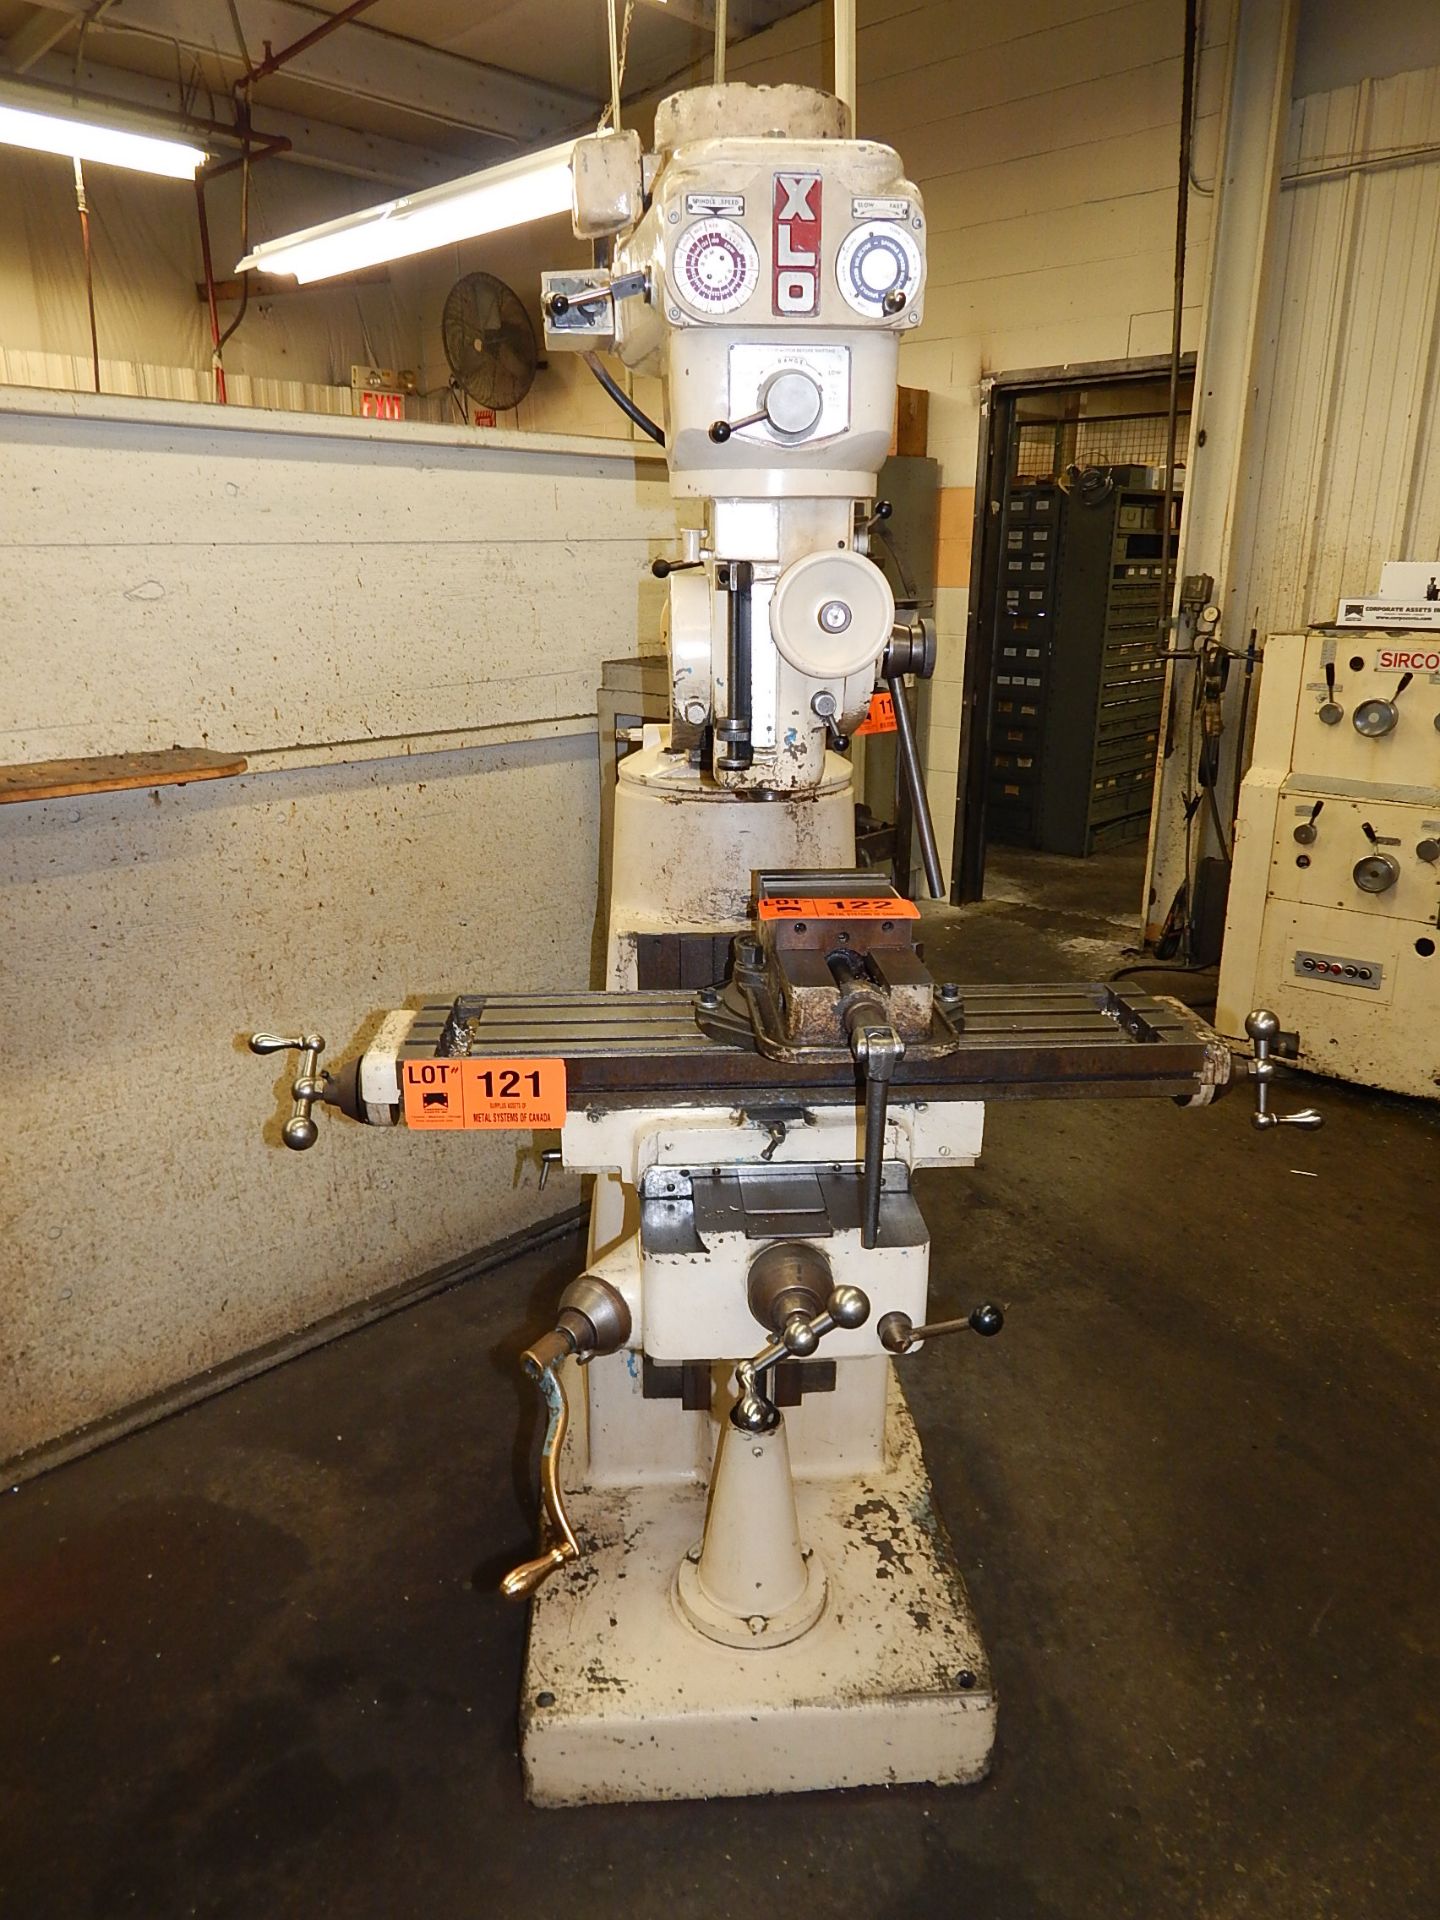 XLO VERTICAL MILL WITH 1HP, SPEEDS TO 3800RPM, 36" X 9" T-SLOT TABLE S/N: 6020614 (CI) - RIGGING FEE - Image 2 of 2